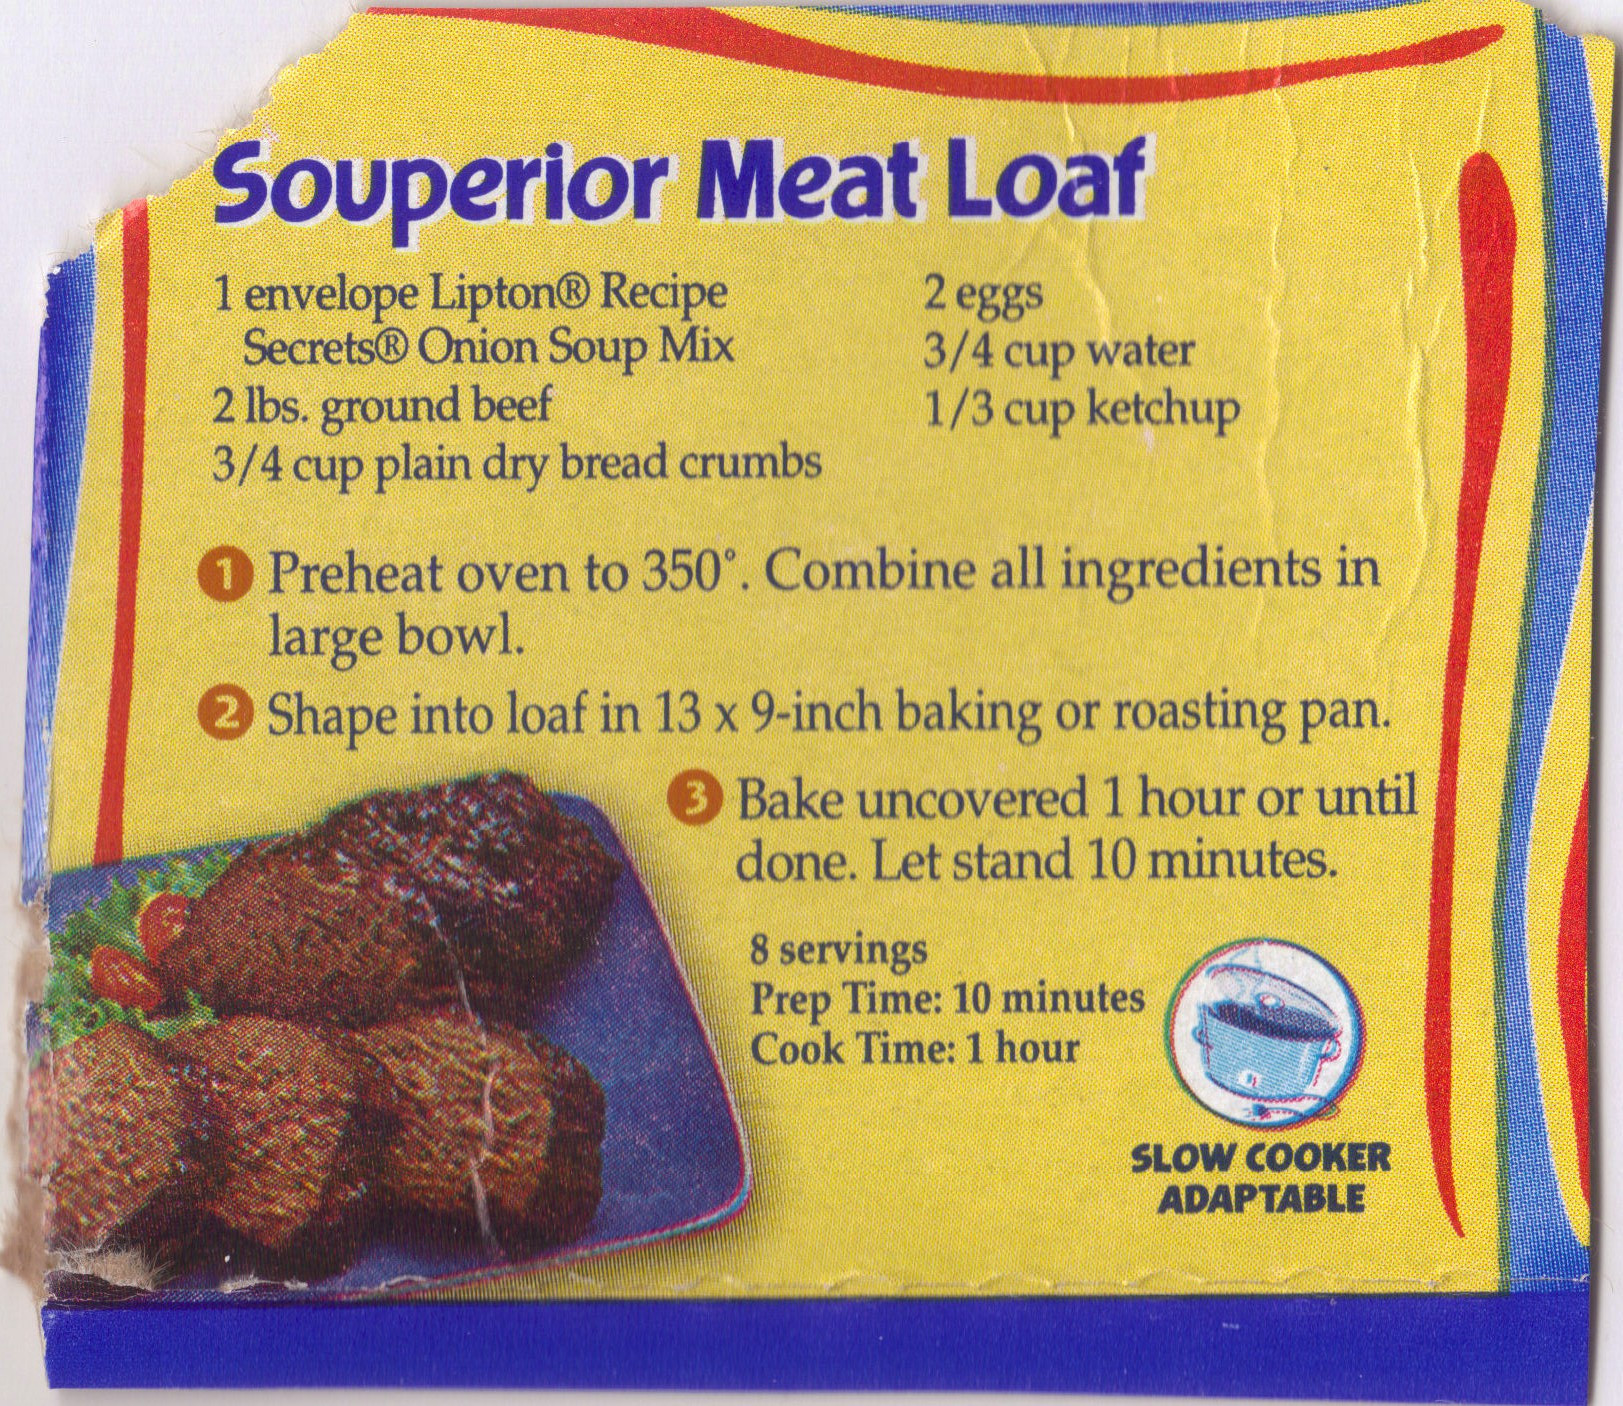 Lipton Onion Soup Mix Meatloaf Recipe
 meatloaf with onion soup mix and evaporated milk